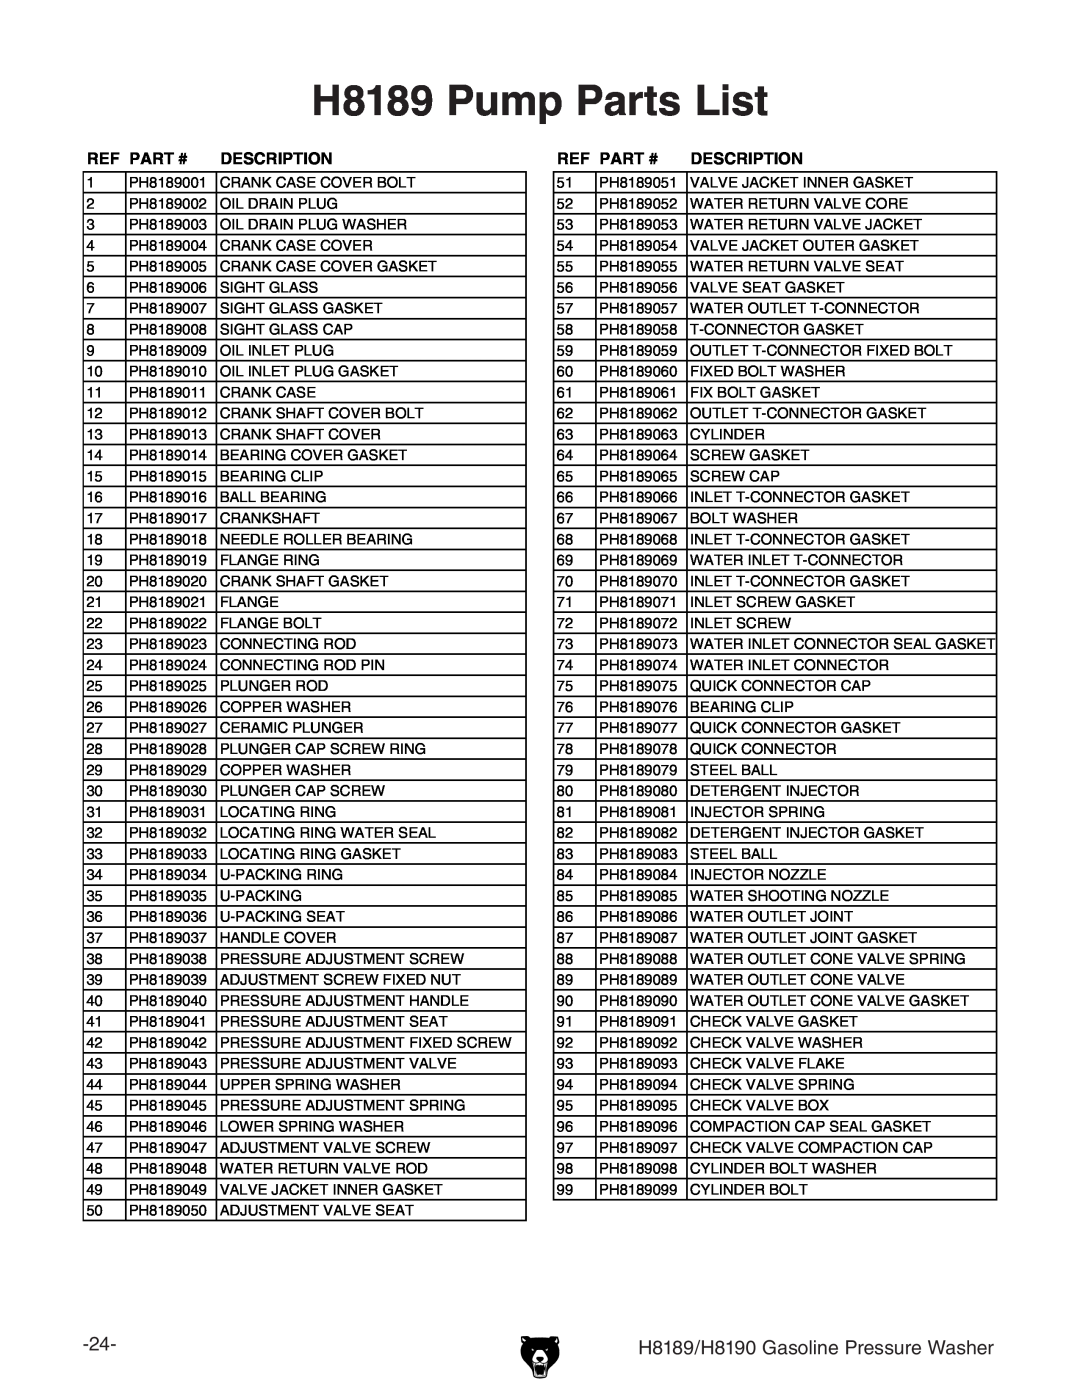 Grizzly owner manual H8189 Pump Parts List, H8189/H8190 Gasoline Pressure Washer 